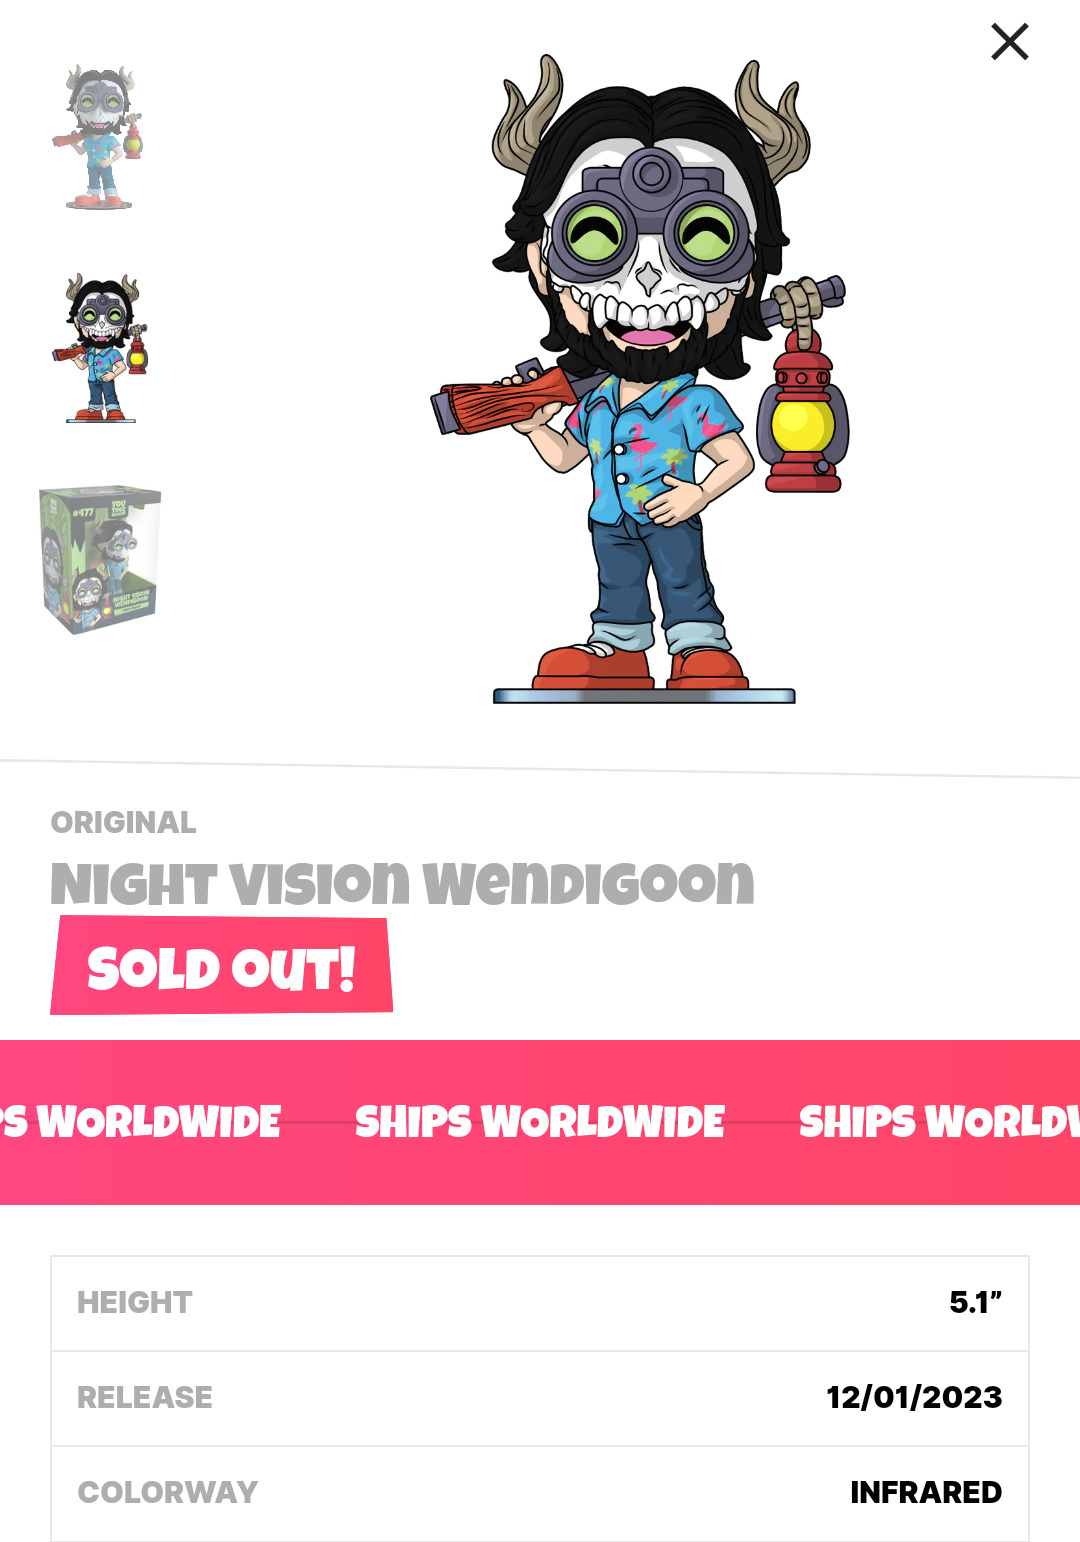 Night Vision Wendigoon Youtooz Vinyl Figure #477 W/ Protector Sold Out Forever